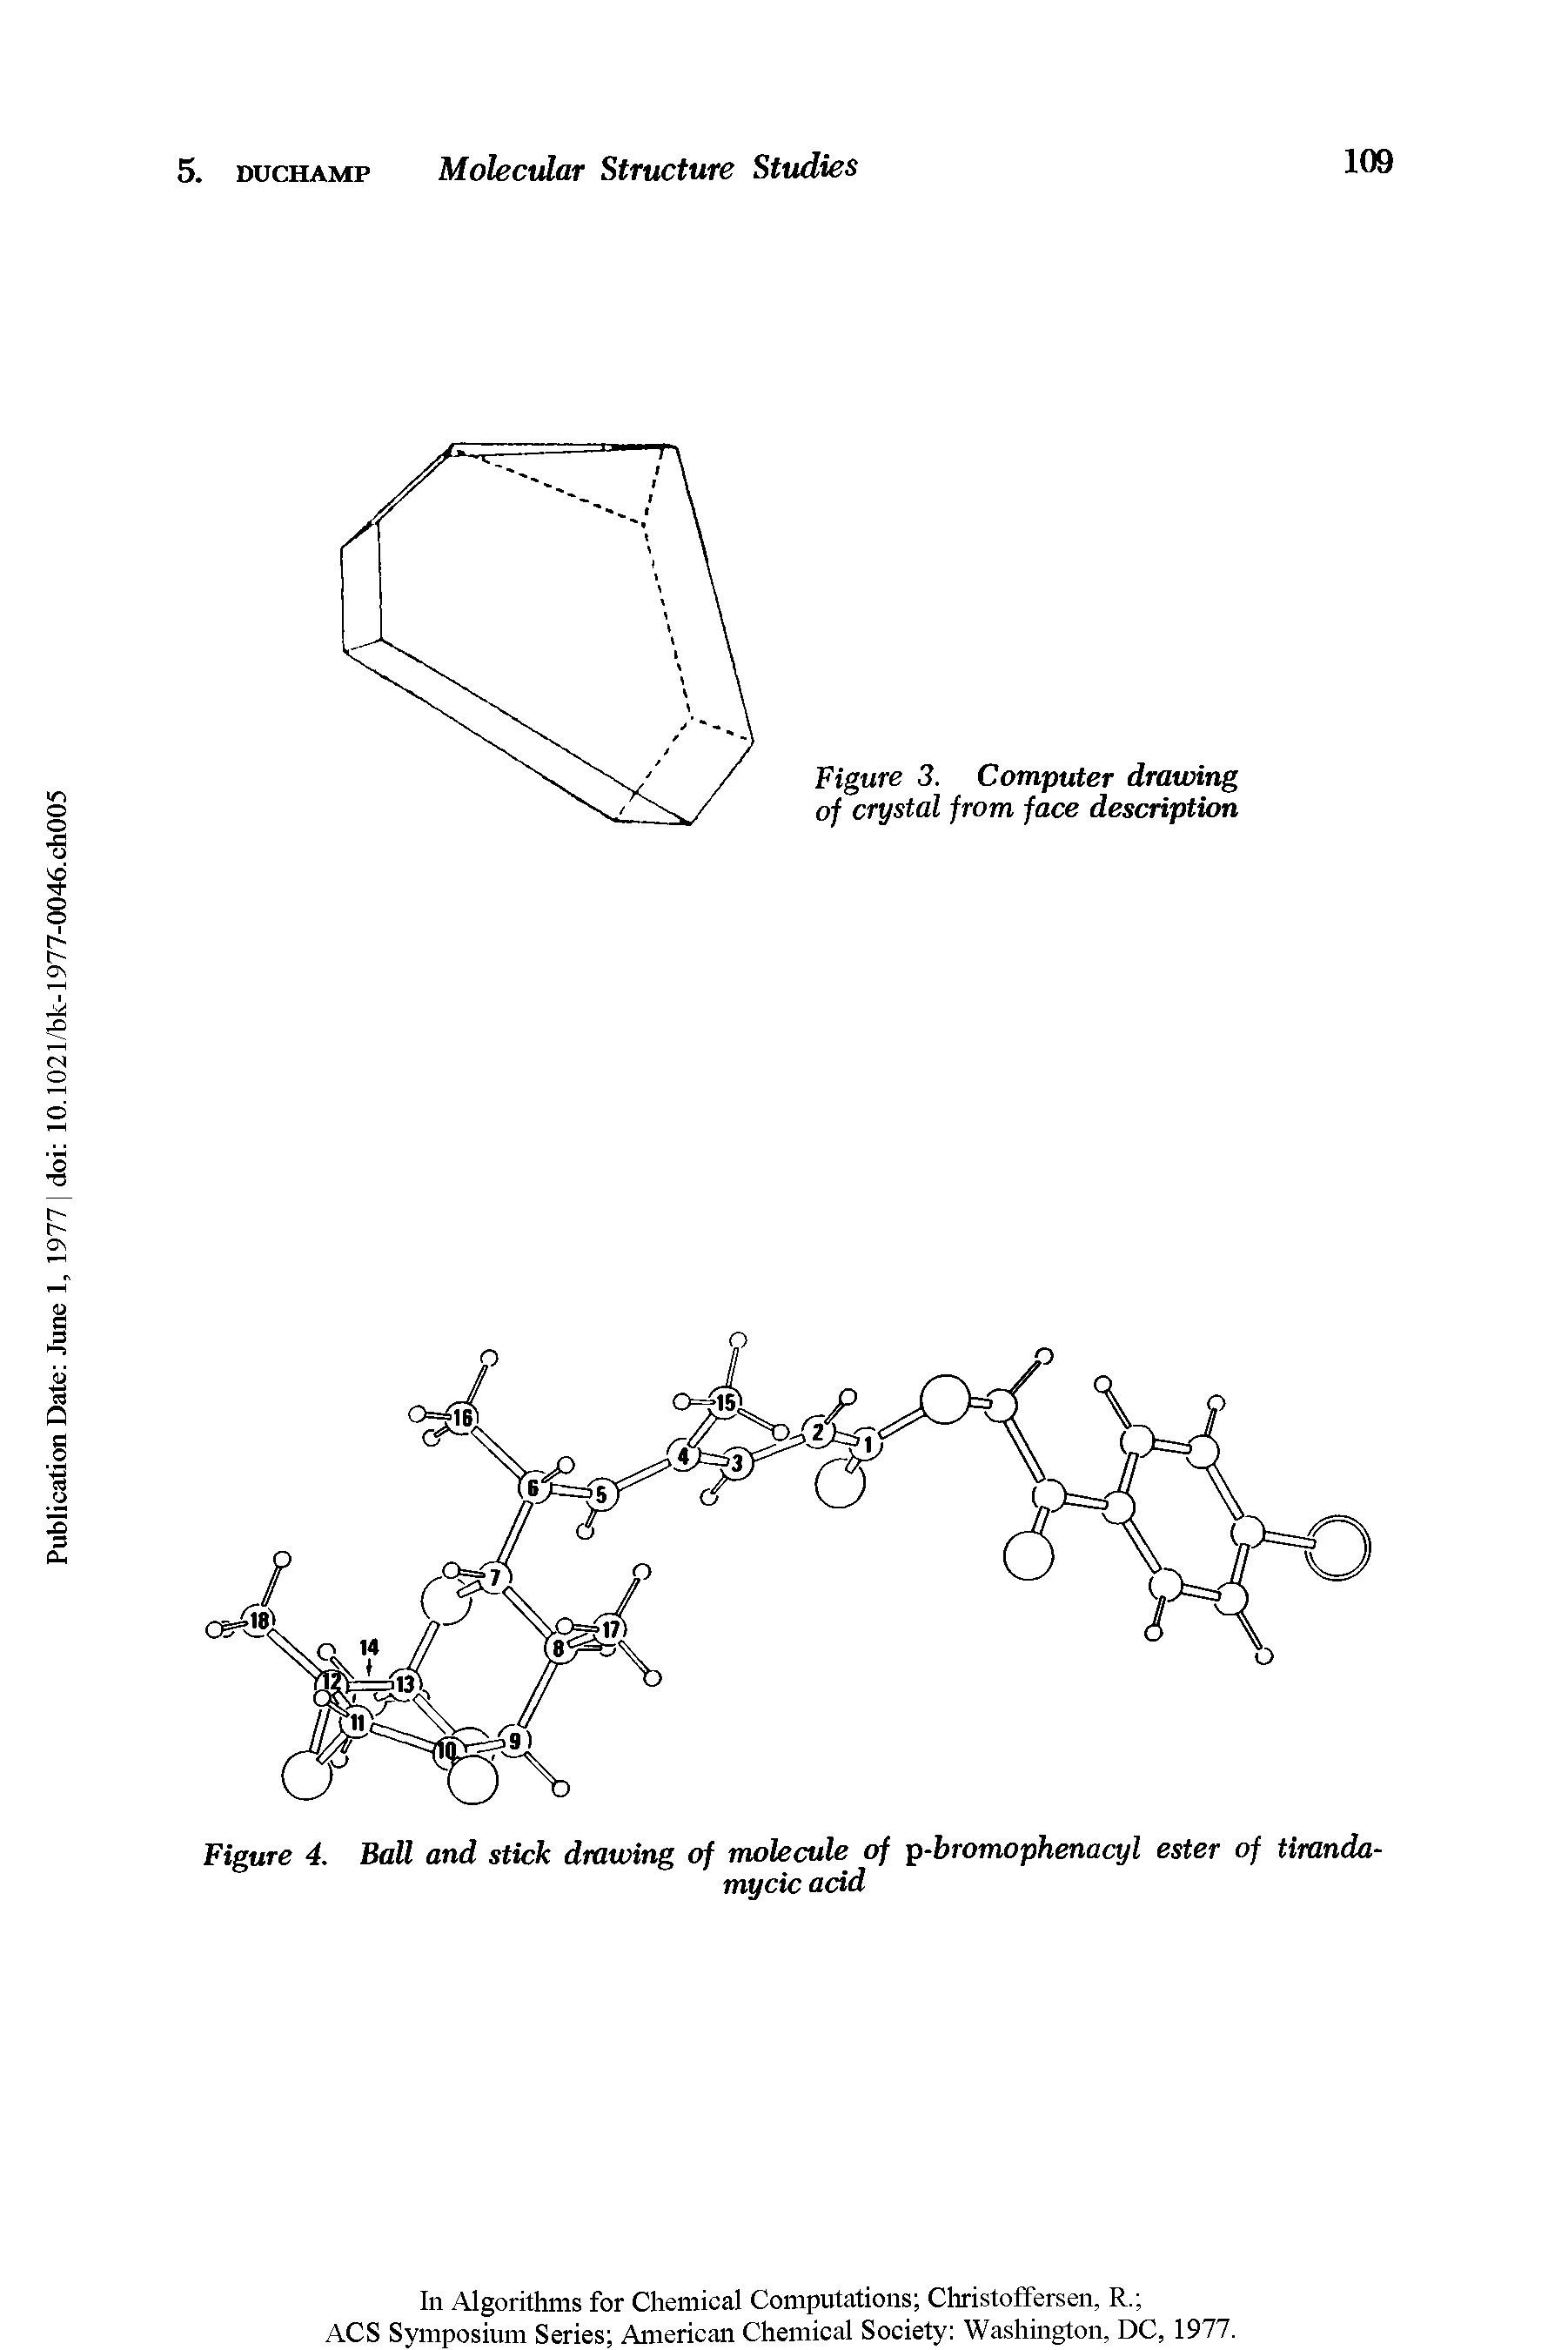 Figure 3. Computer draining of crystal from face description...